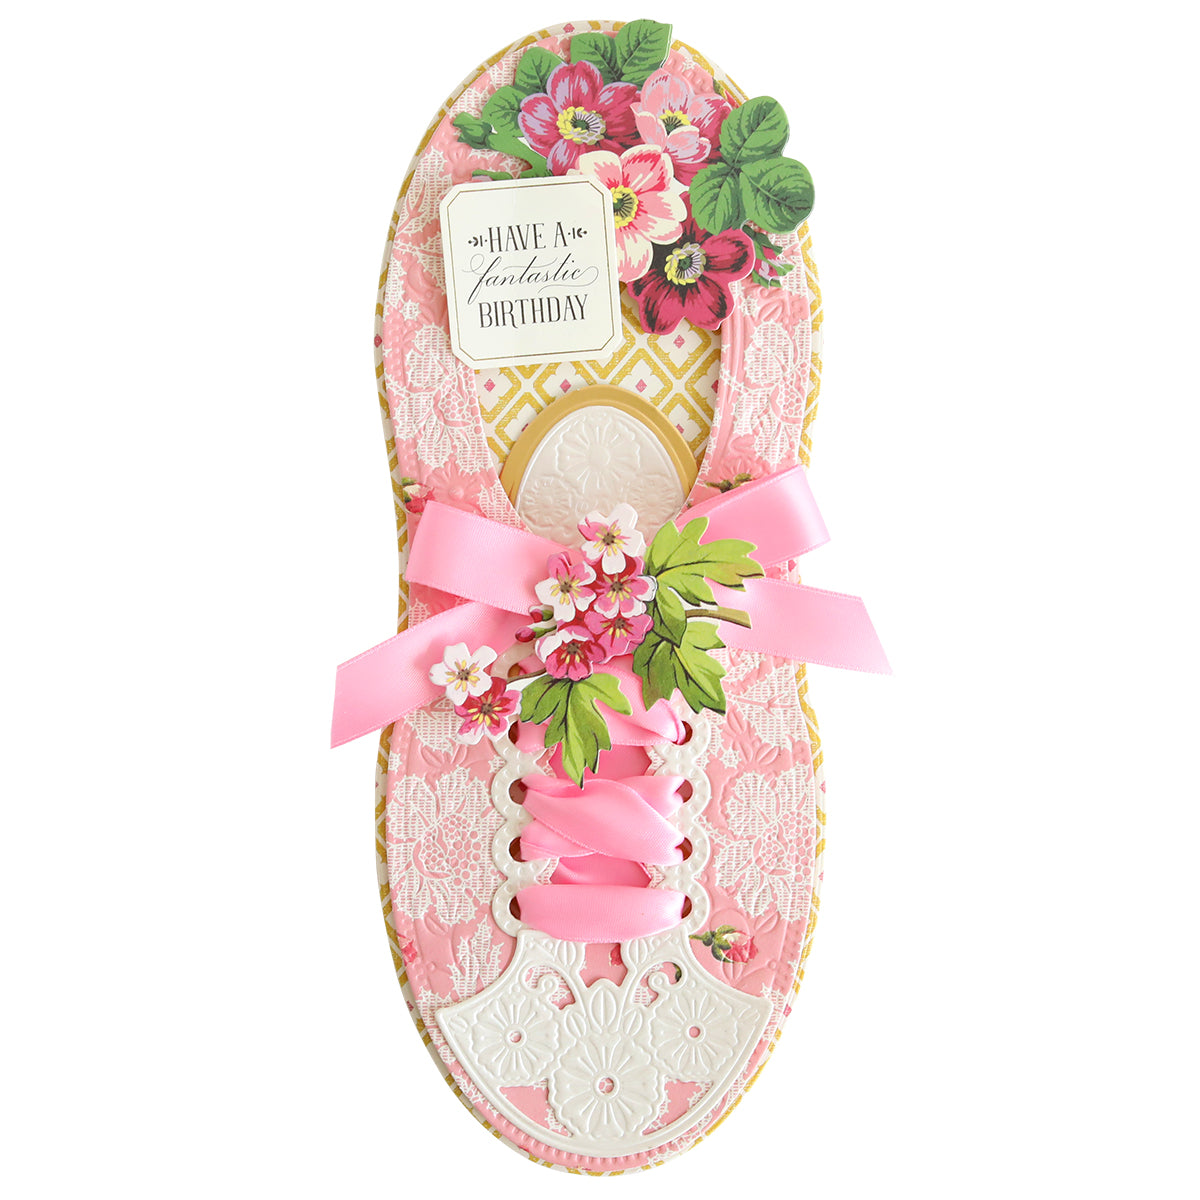 A decorative Paper Sneakers Refill Kit birthday card, adorned with pink ribbons and floral accents against a white background, featuring 3D sentiments and layers.